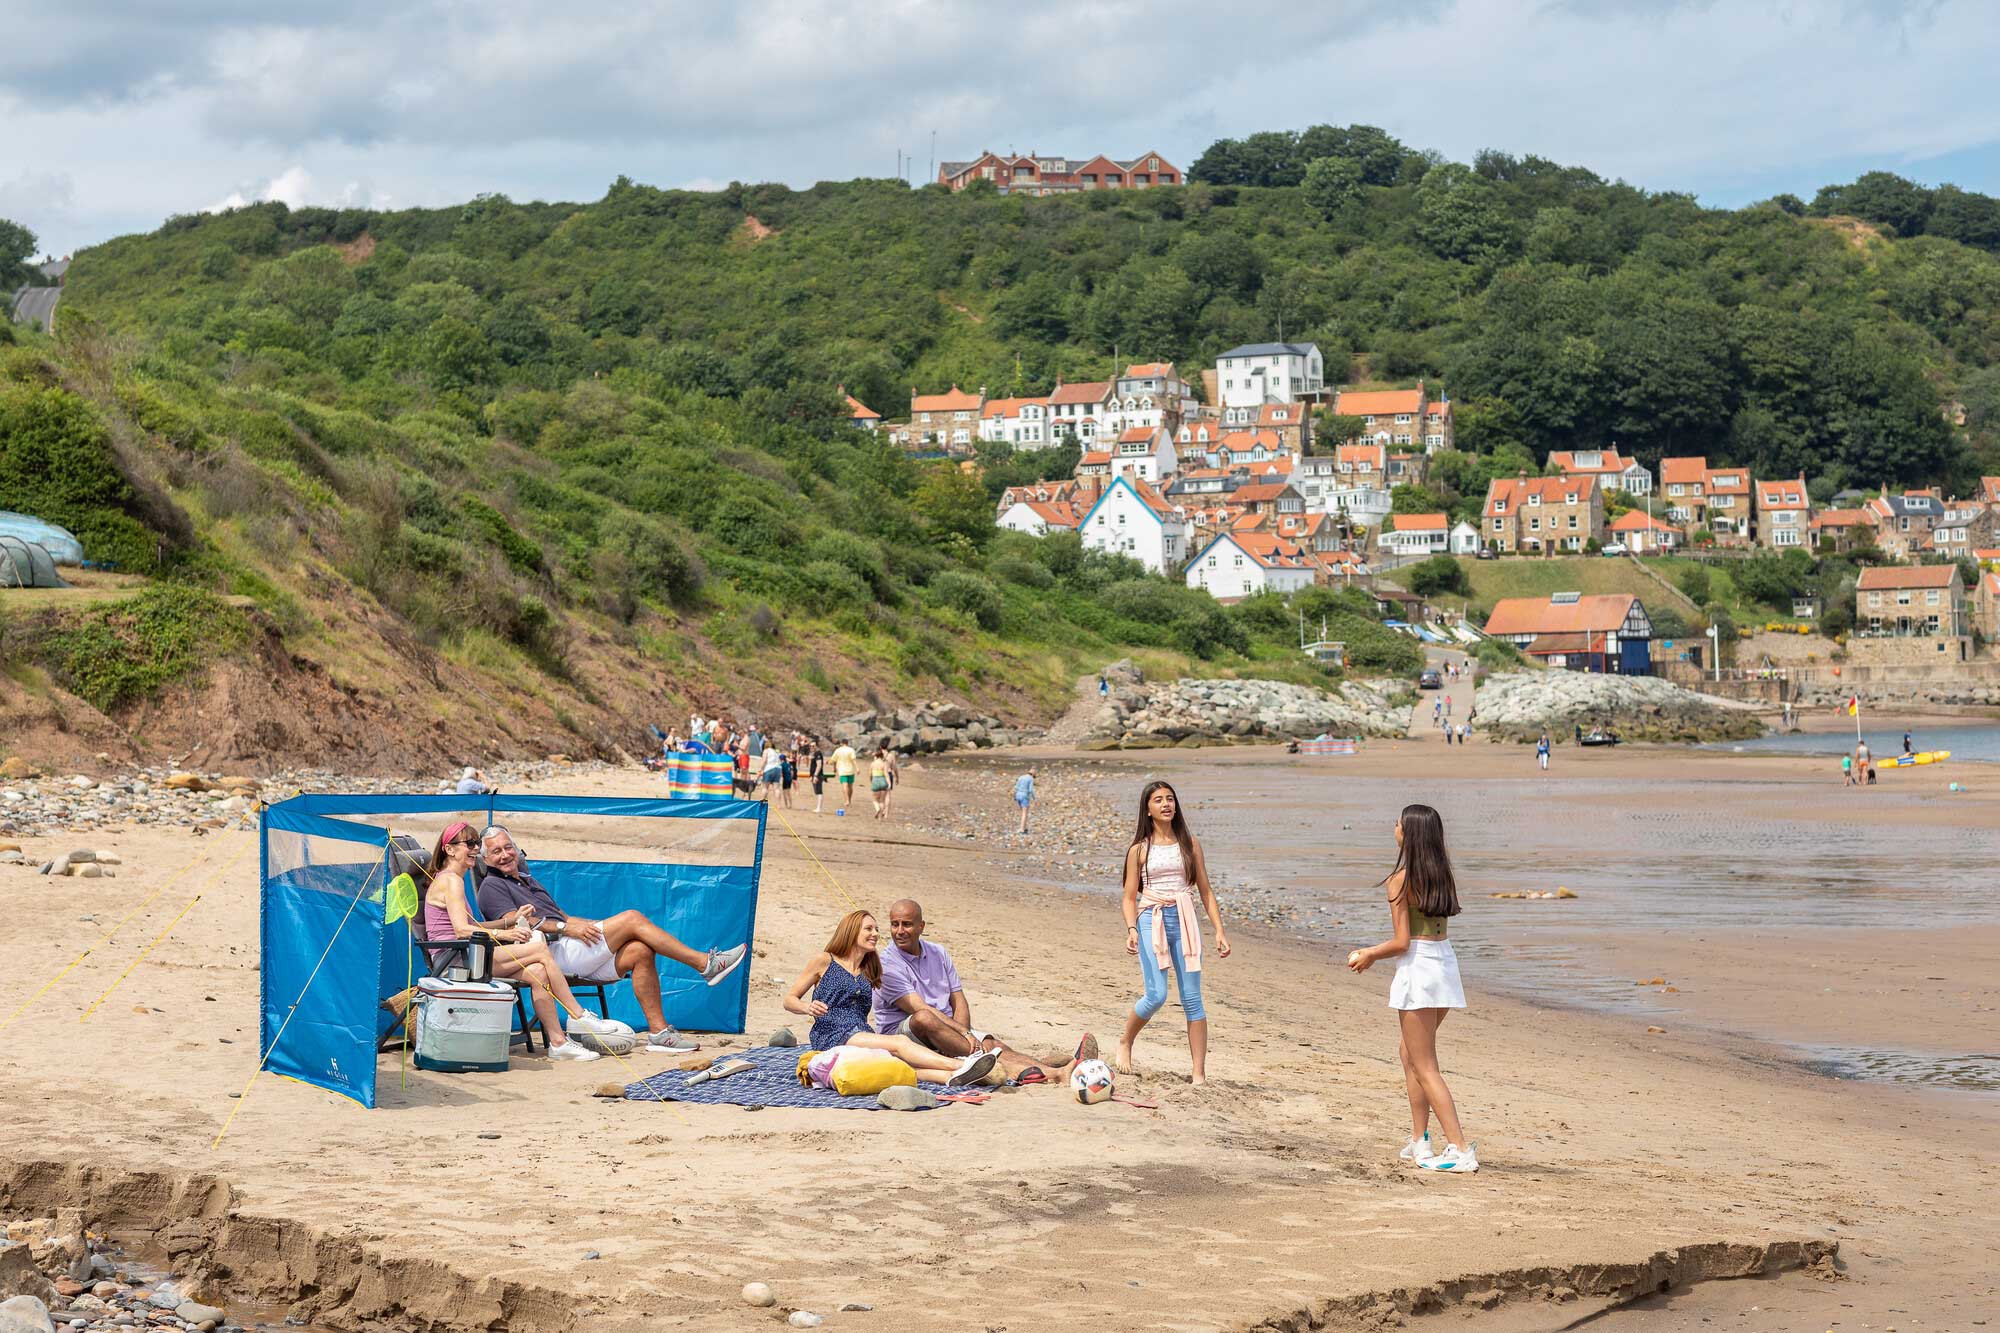 People enjoying a sunny day on a sandy beach with a backdrop of picturesque houses on a hill. Some individuals are sitting within a blue windbreak, while others are playing catch on the beach. Credit Dependable Productions.